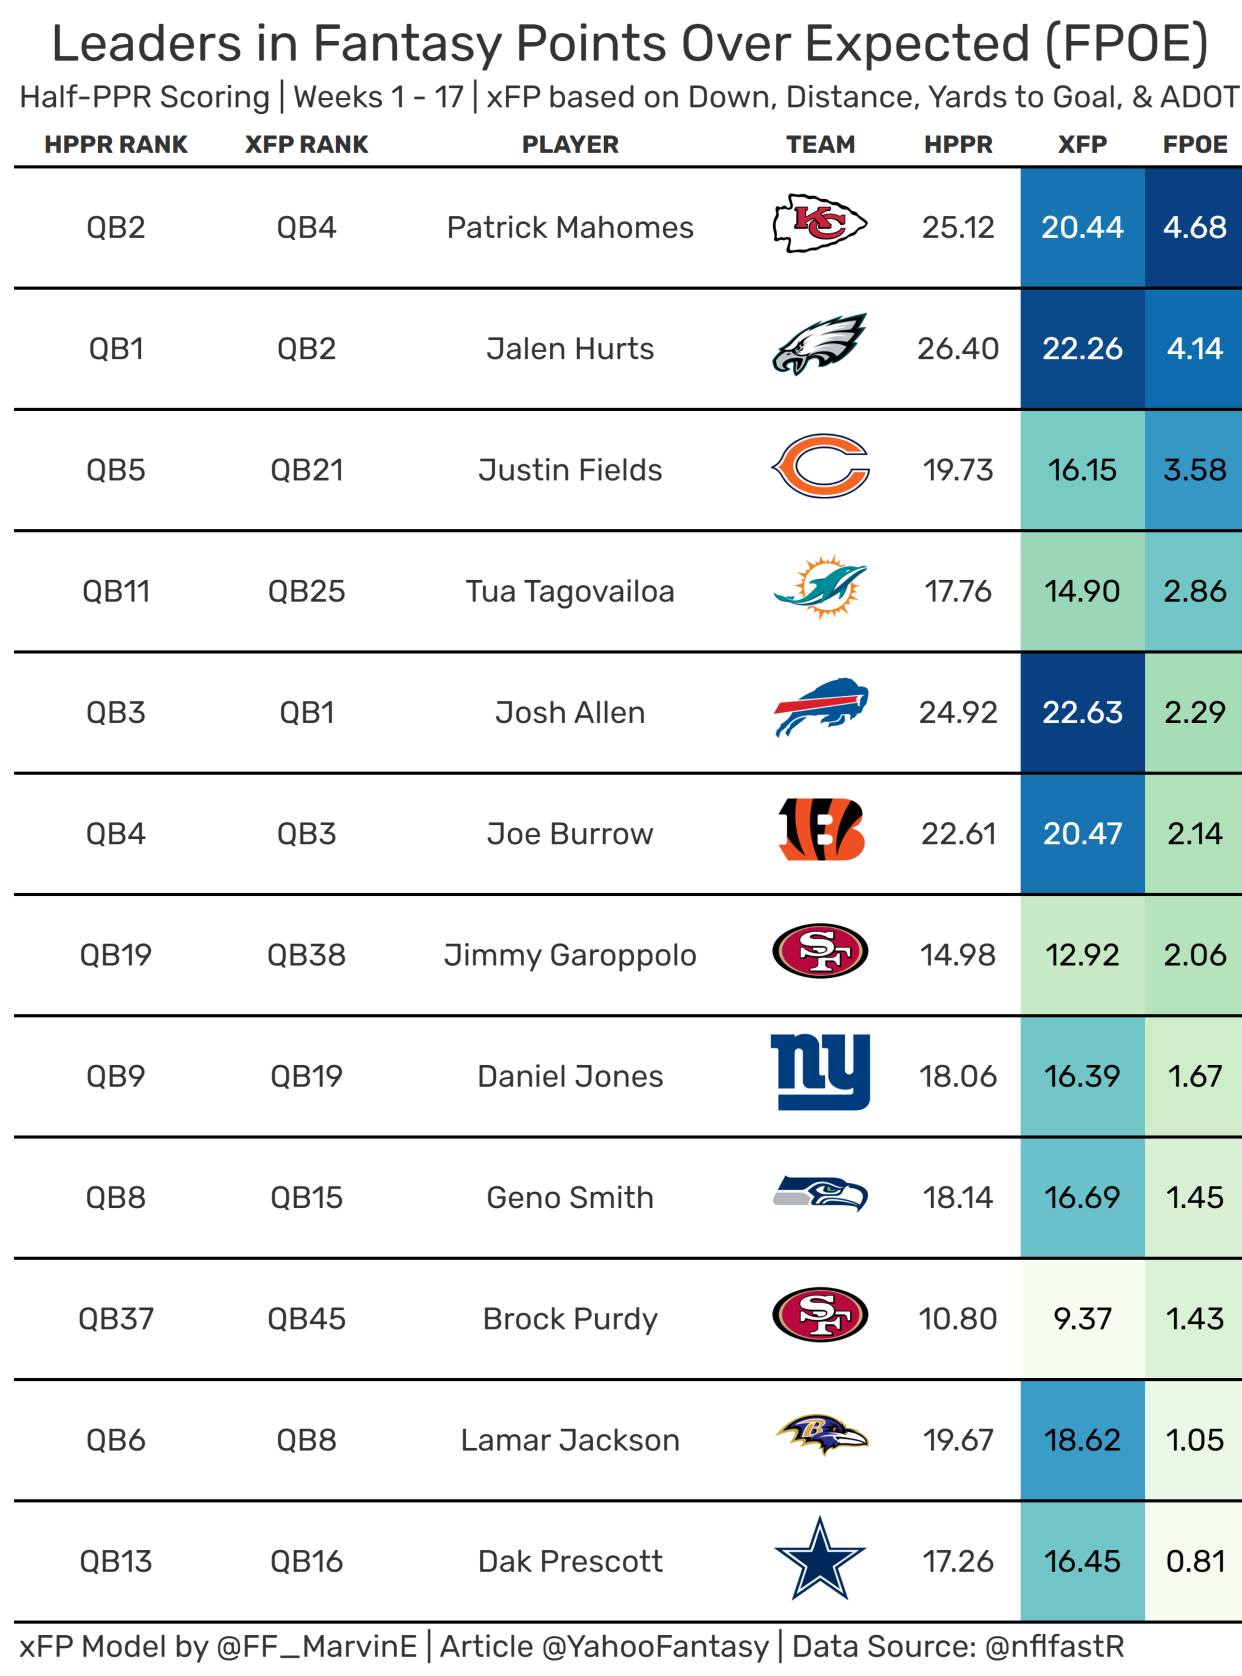 Quarterback leaders in fantasy points over expected. (Data courtesy of nflfastR)